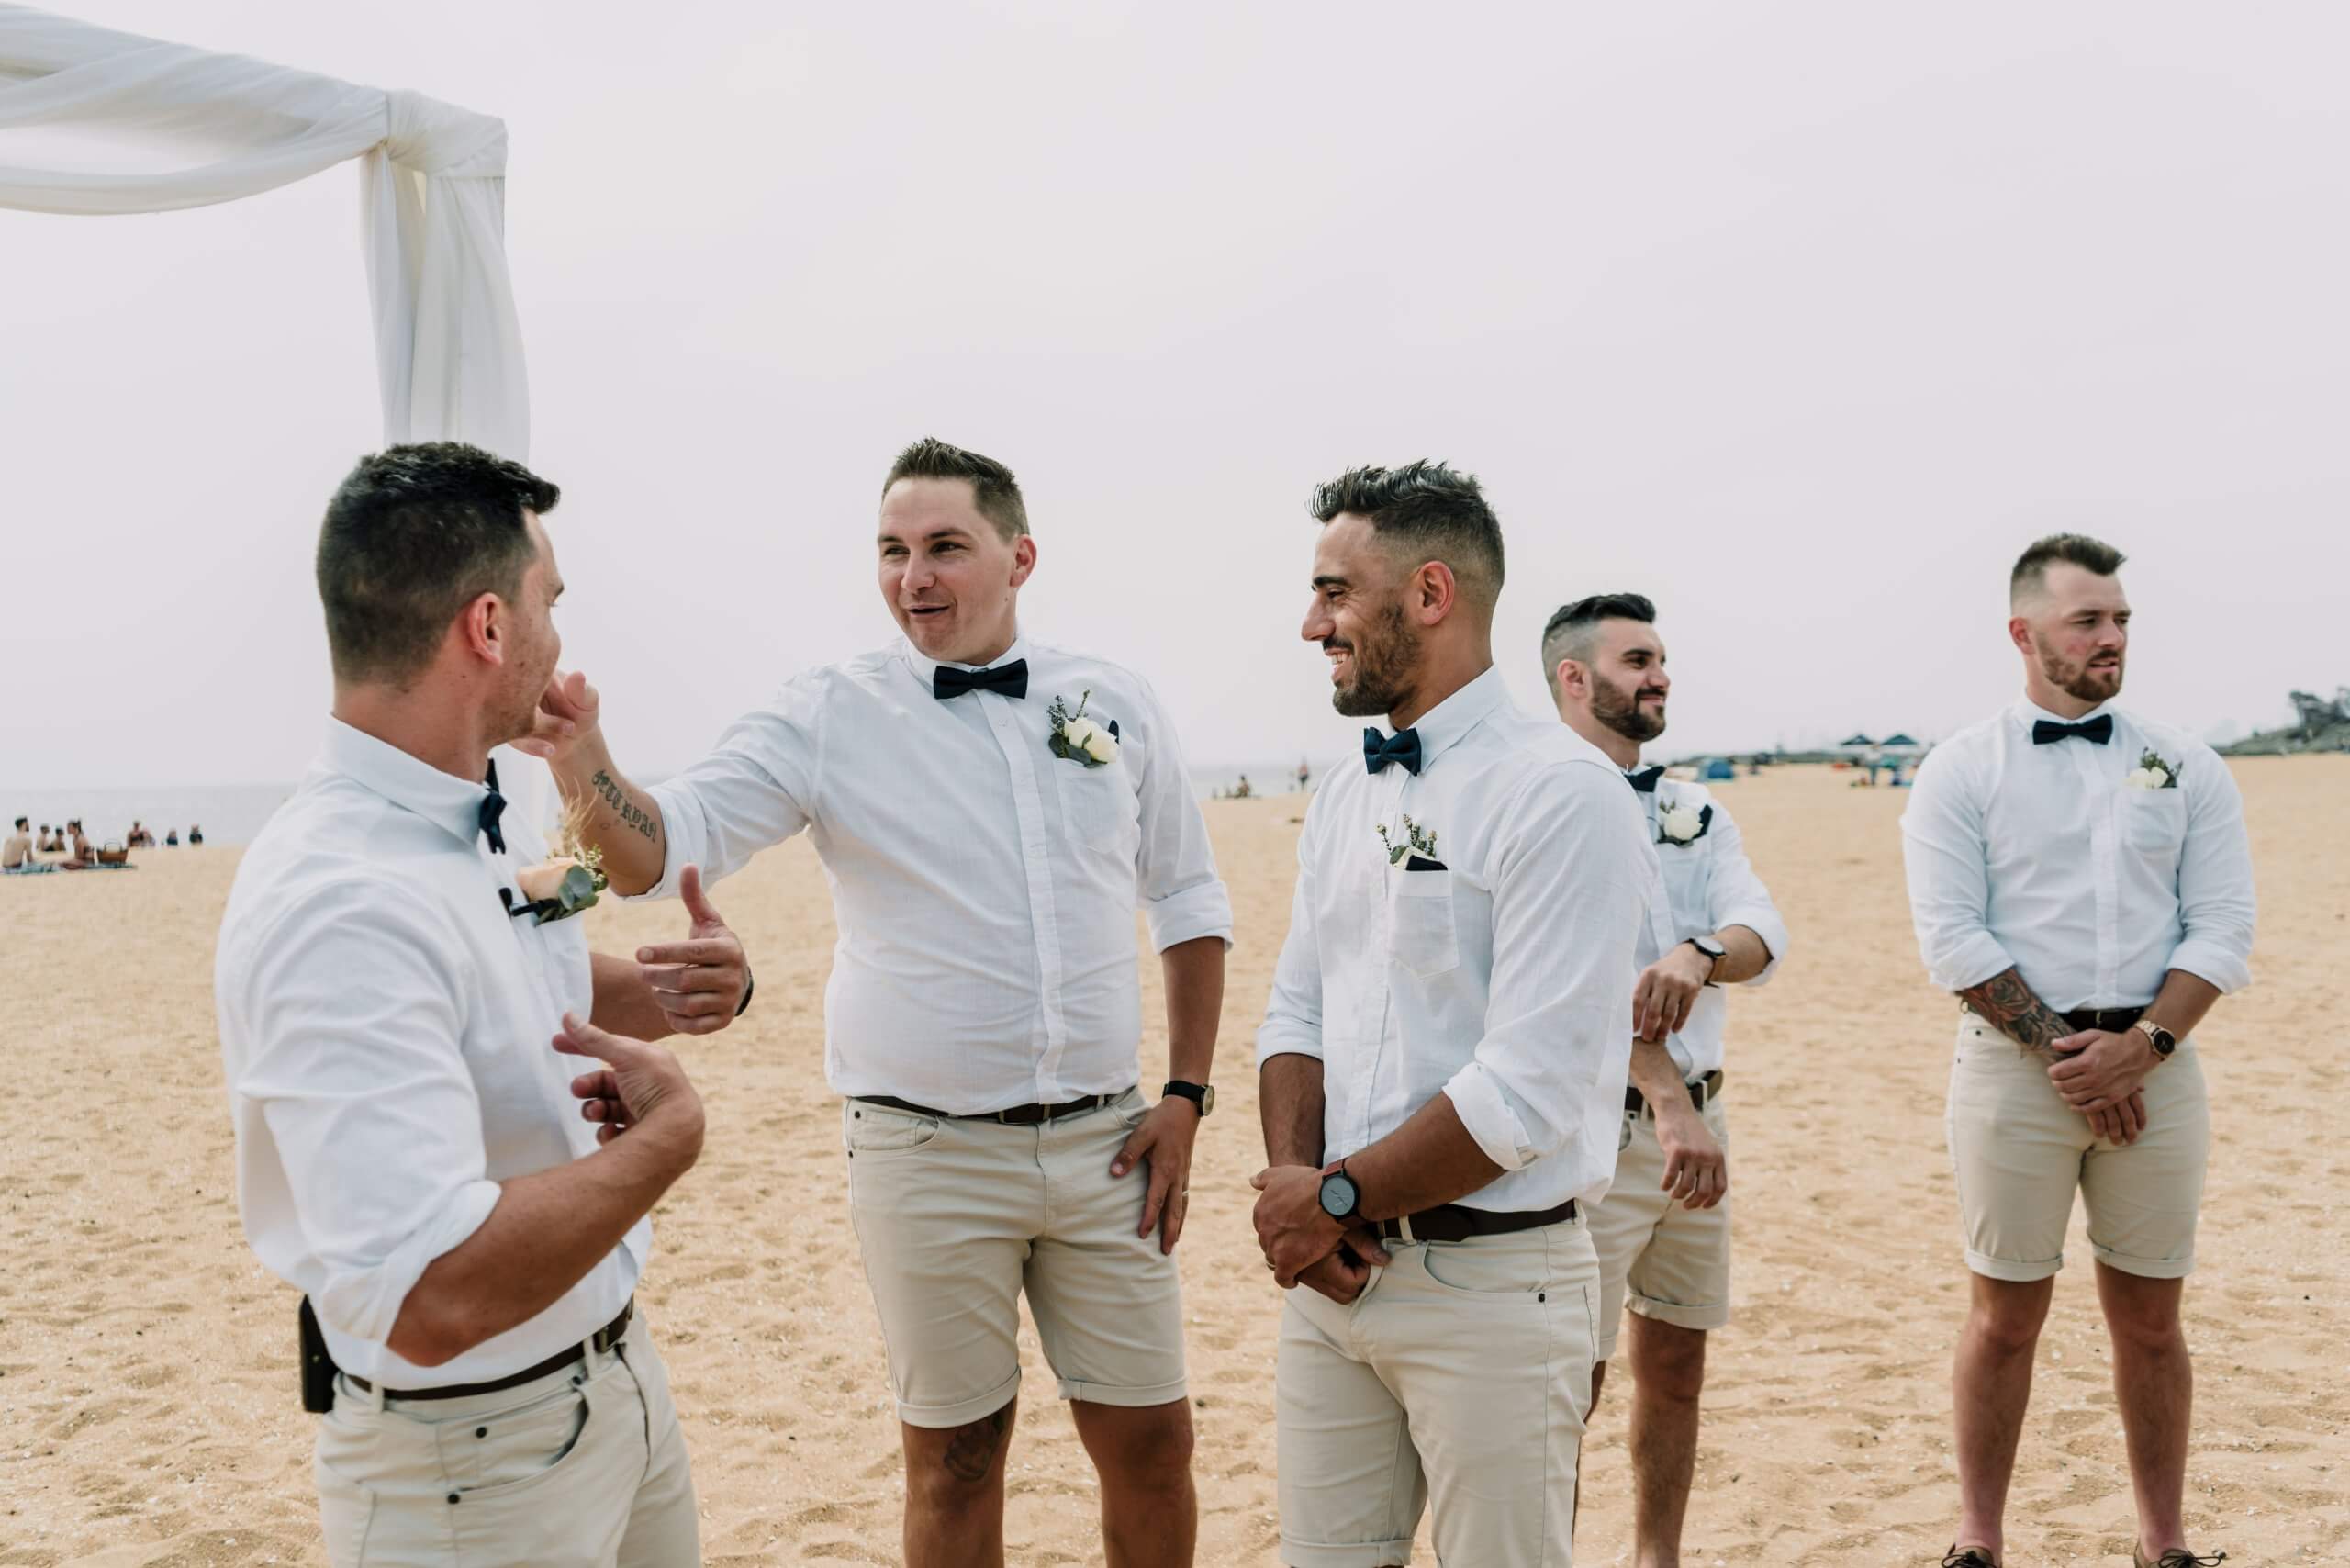 The groom and his groomsmen are being playful in front of the wedding arc as they are waiting for the bride to walk down the sandy aisle of their beachfront wedding.